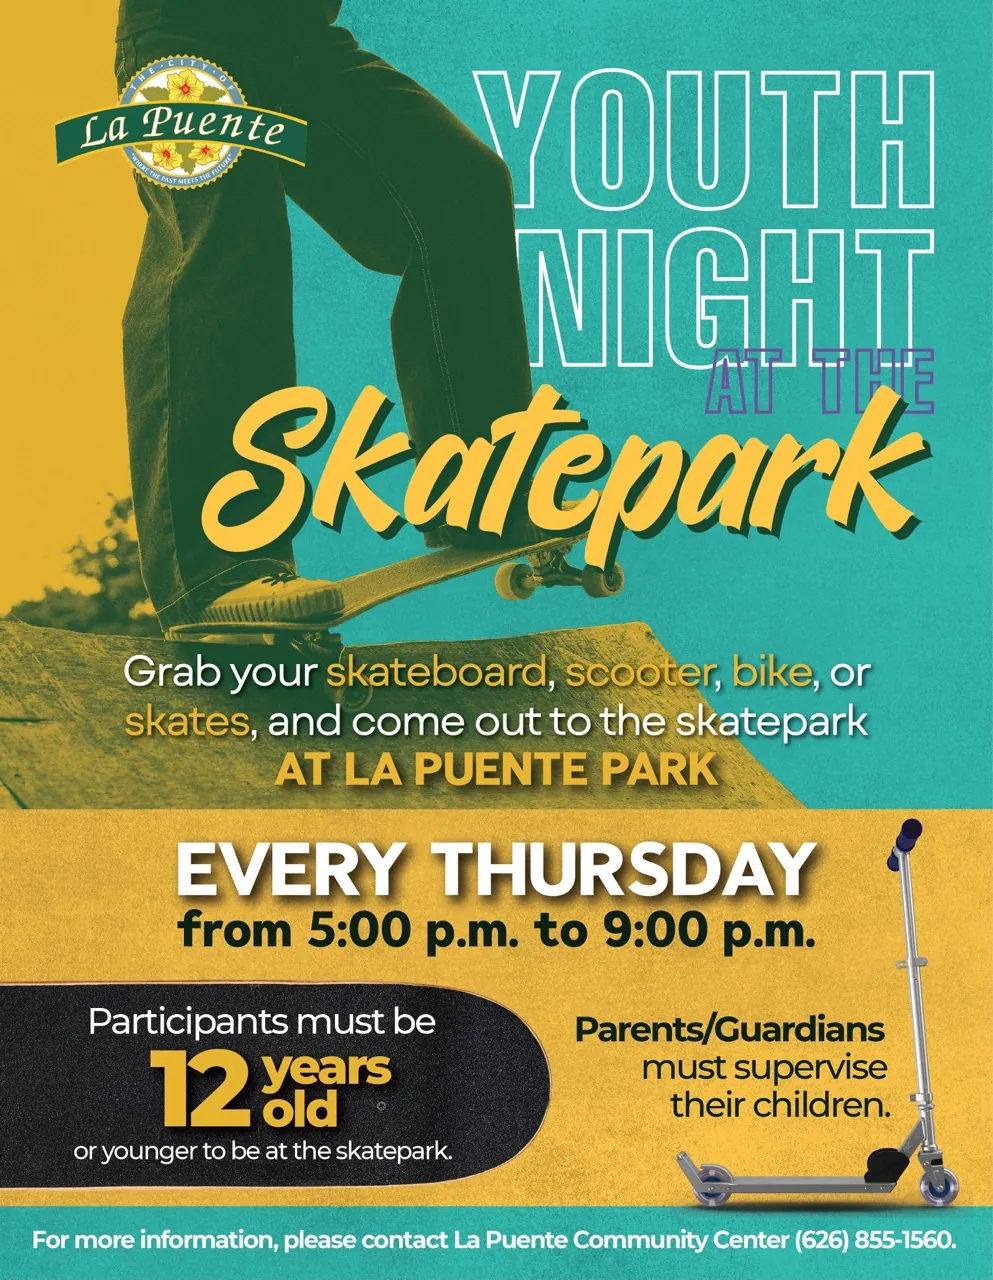 LP_Youth-Night-at-the-Skatepark_FLYER_LP_Youth-Night-at-the-Skatepark_FLYER-Large